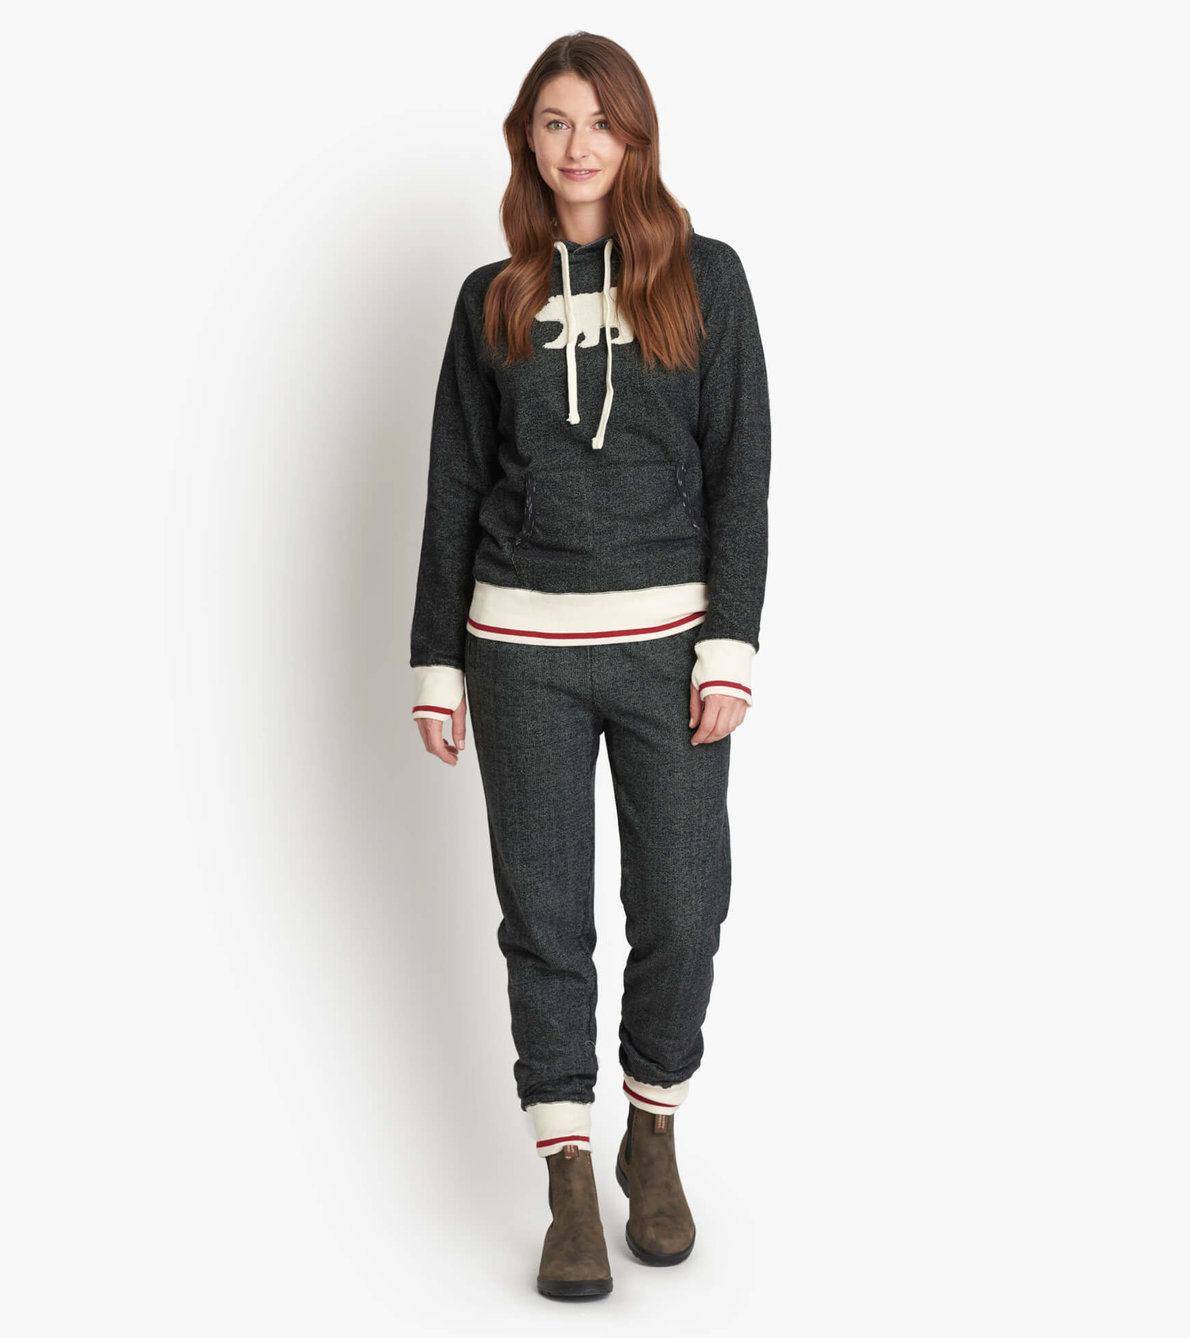 View larger image of Charcoal White Bear Women's Heritage Separates 